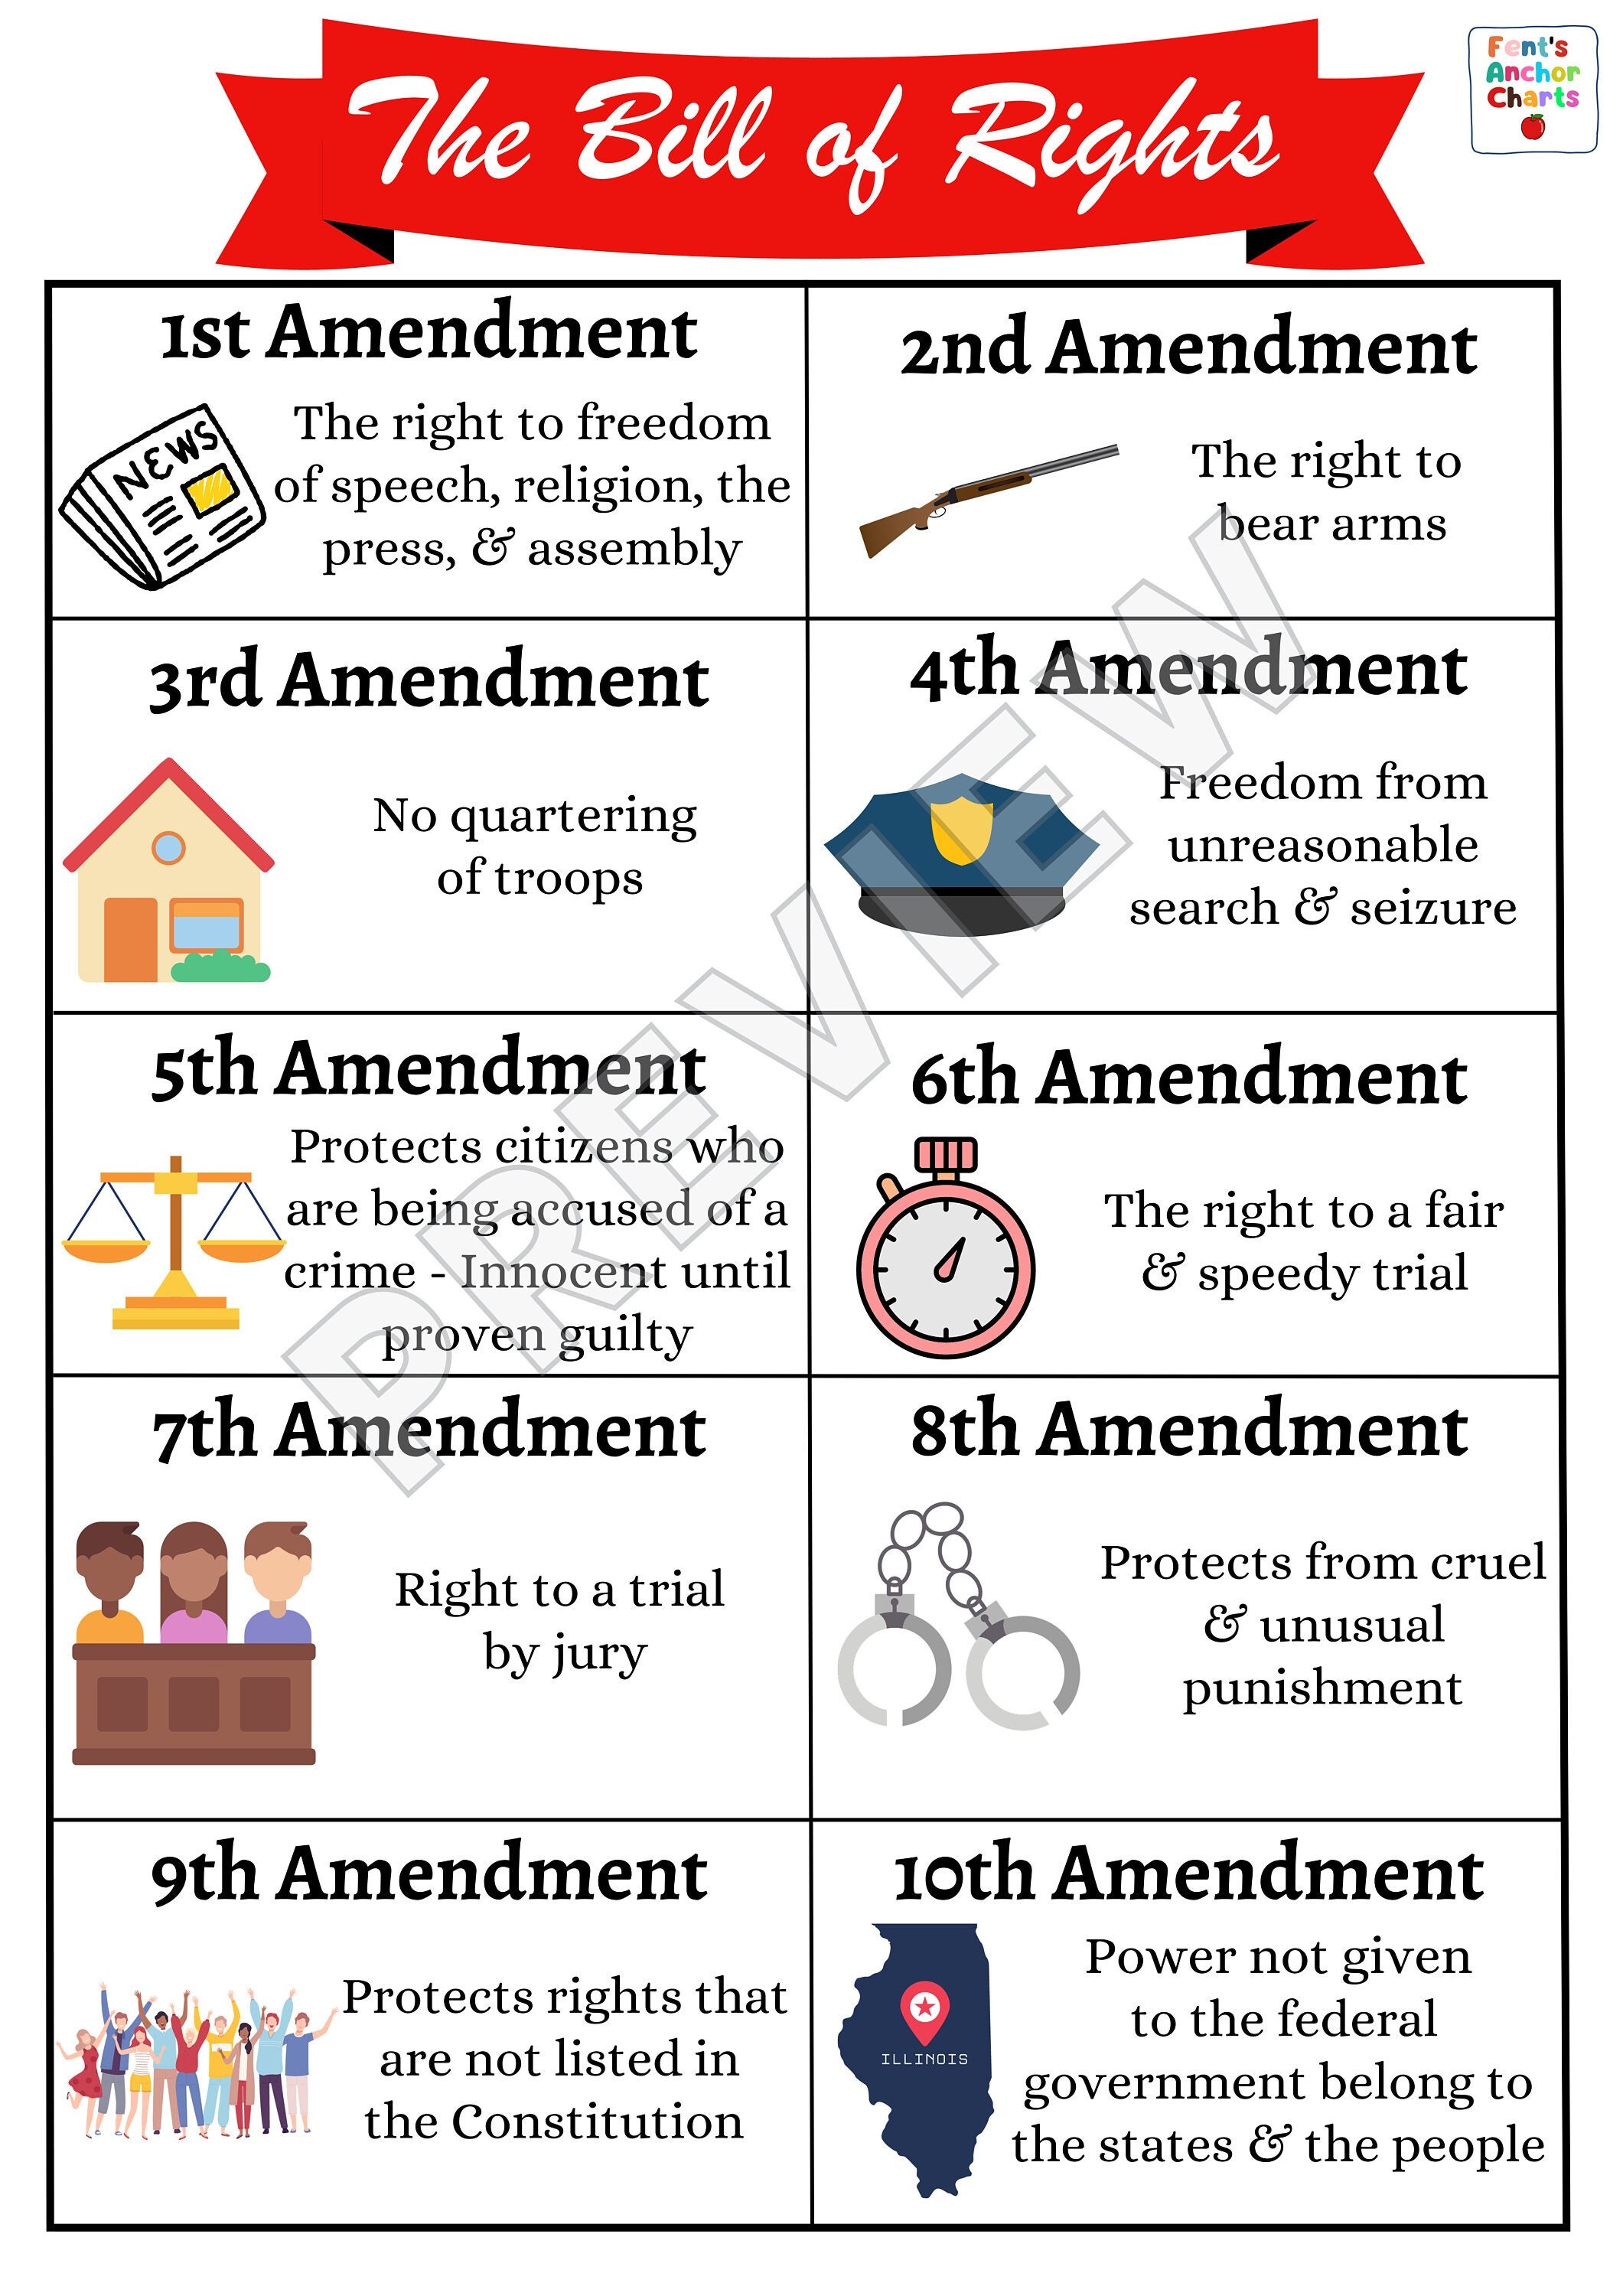 U.S. Constitution Learning Chart